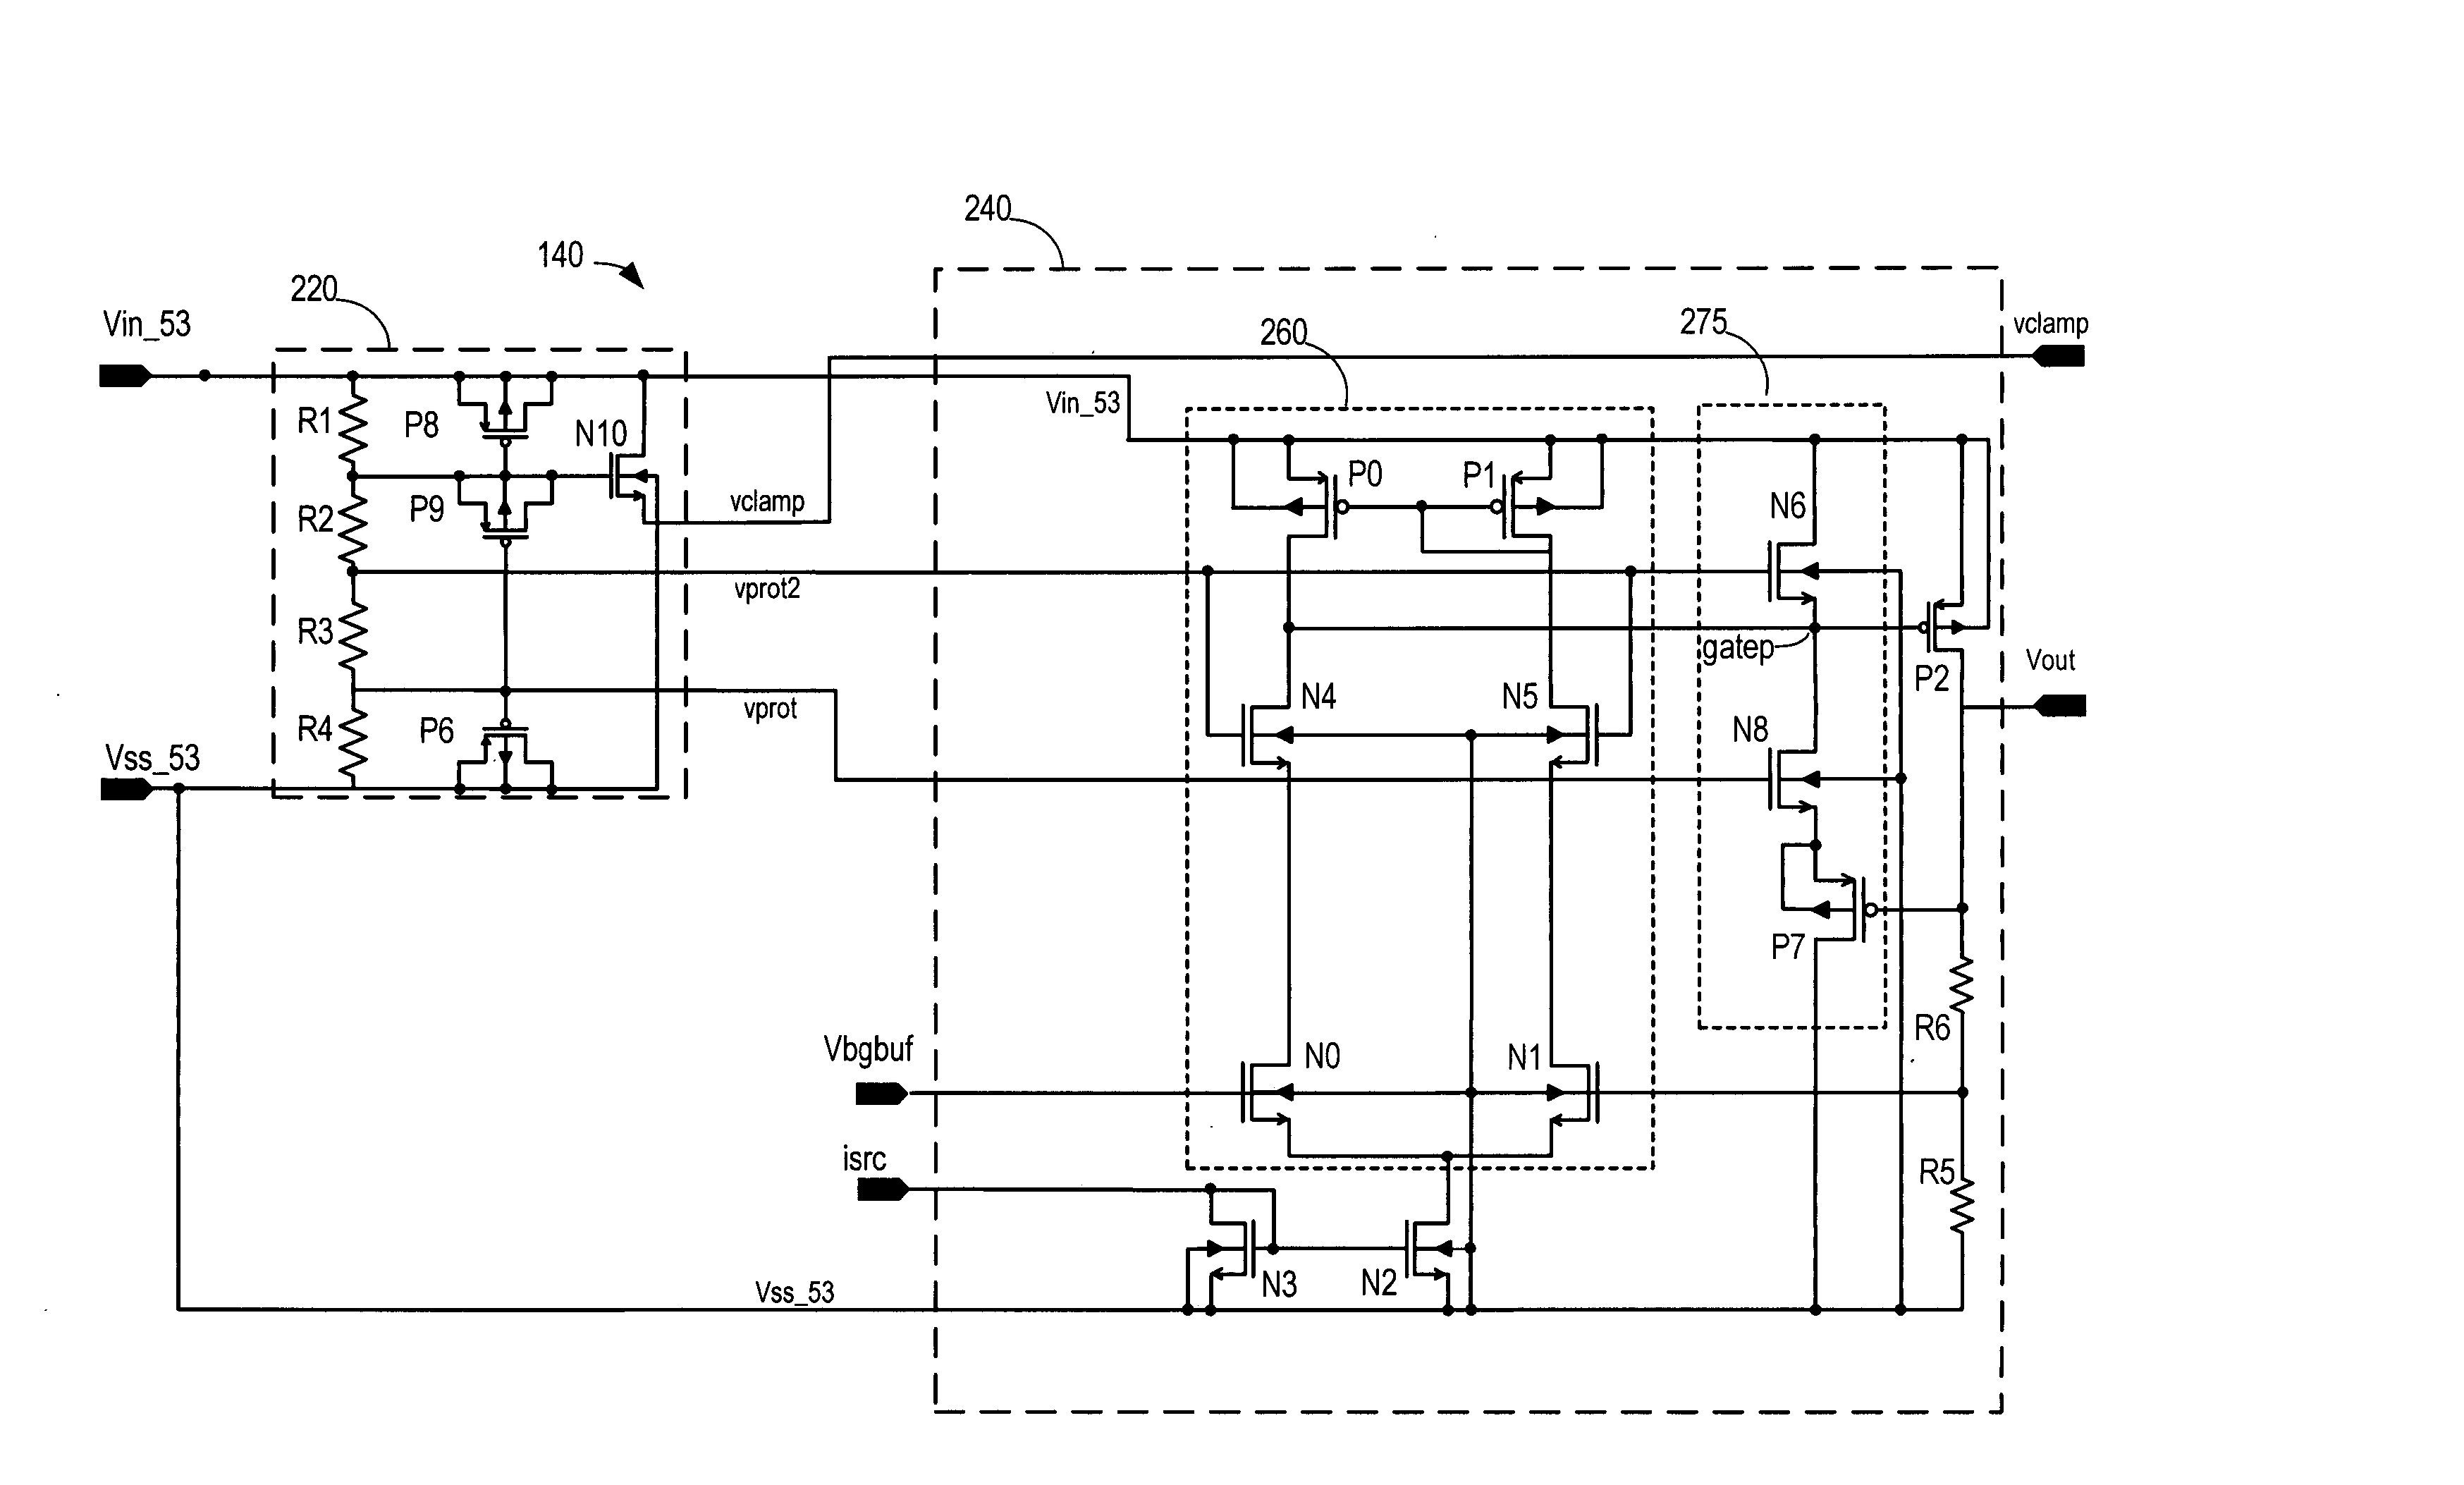 Voltage regulator using protected low voltage devices